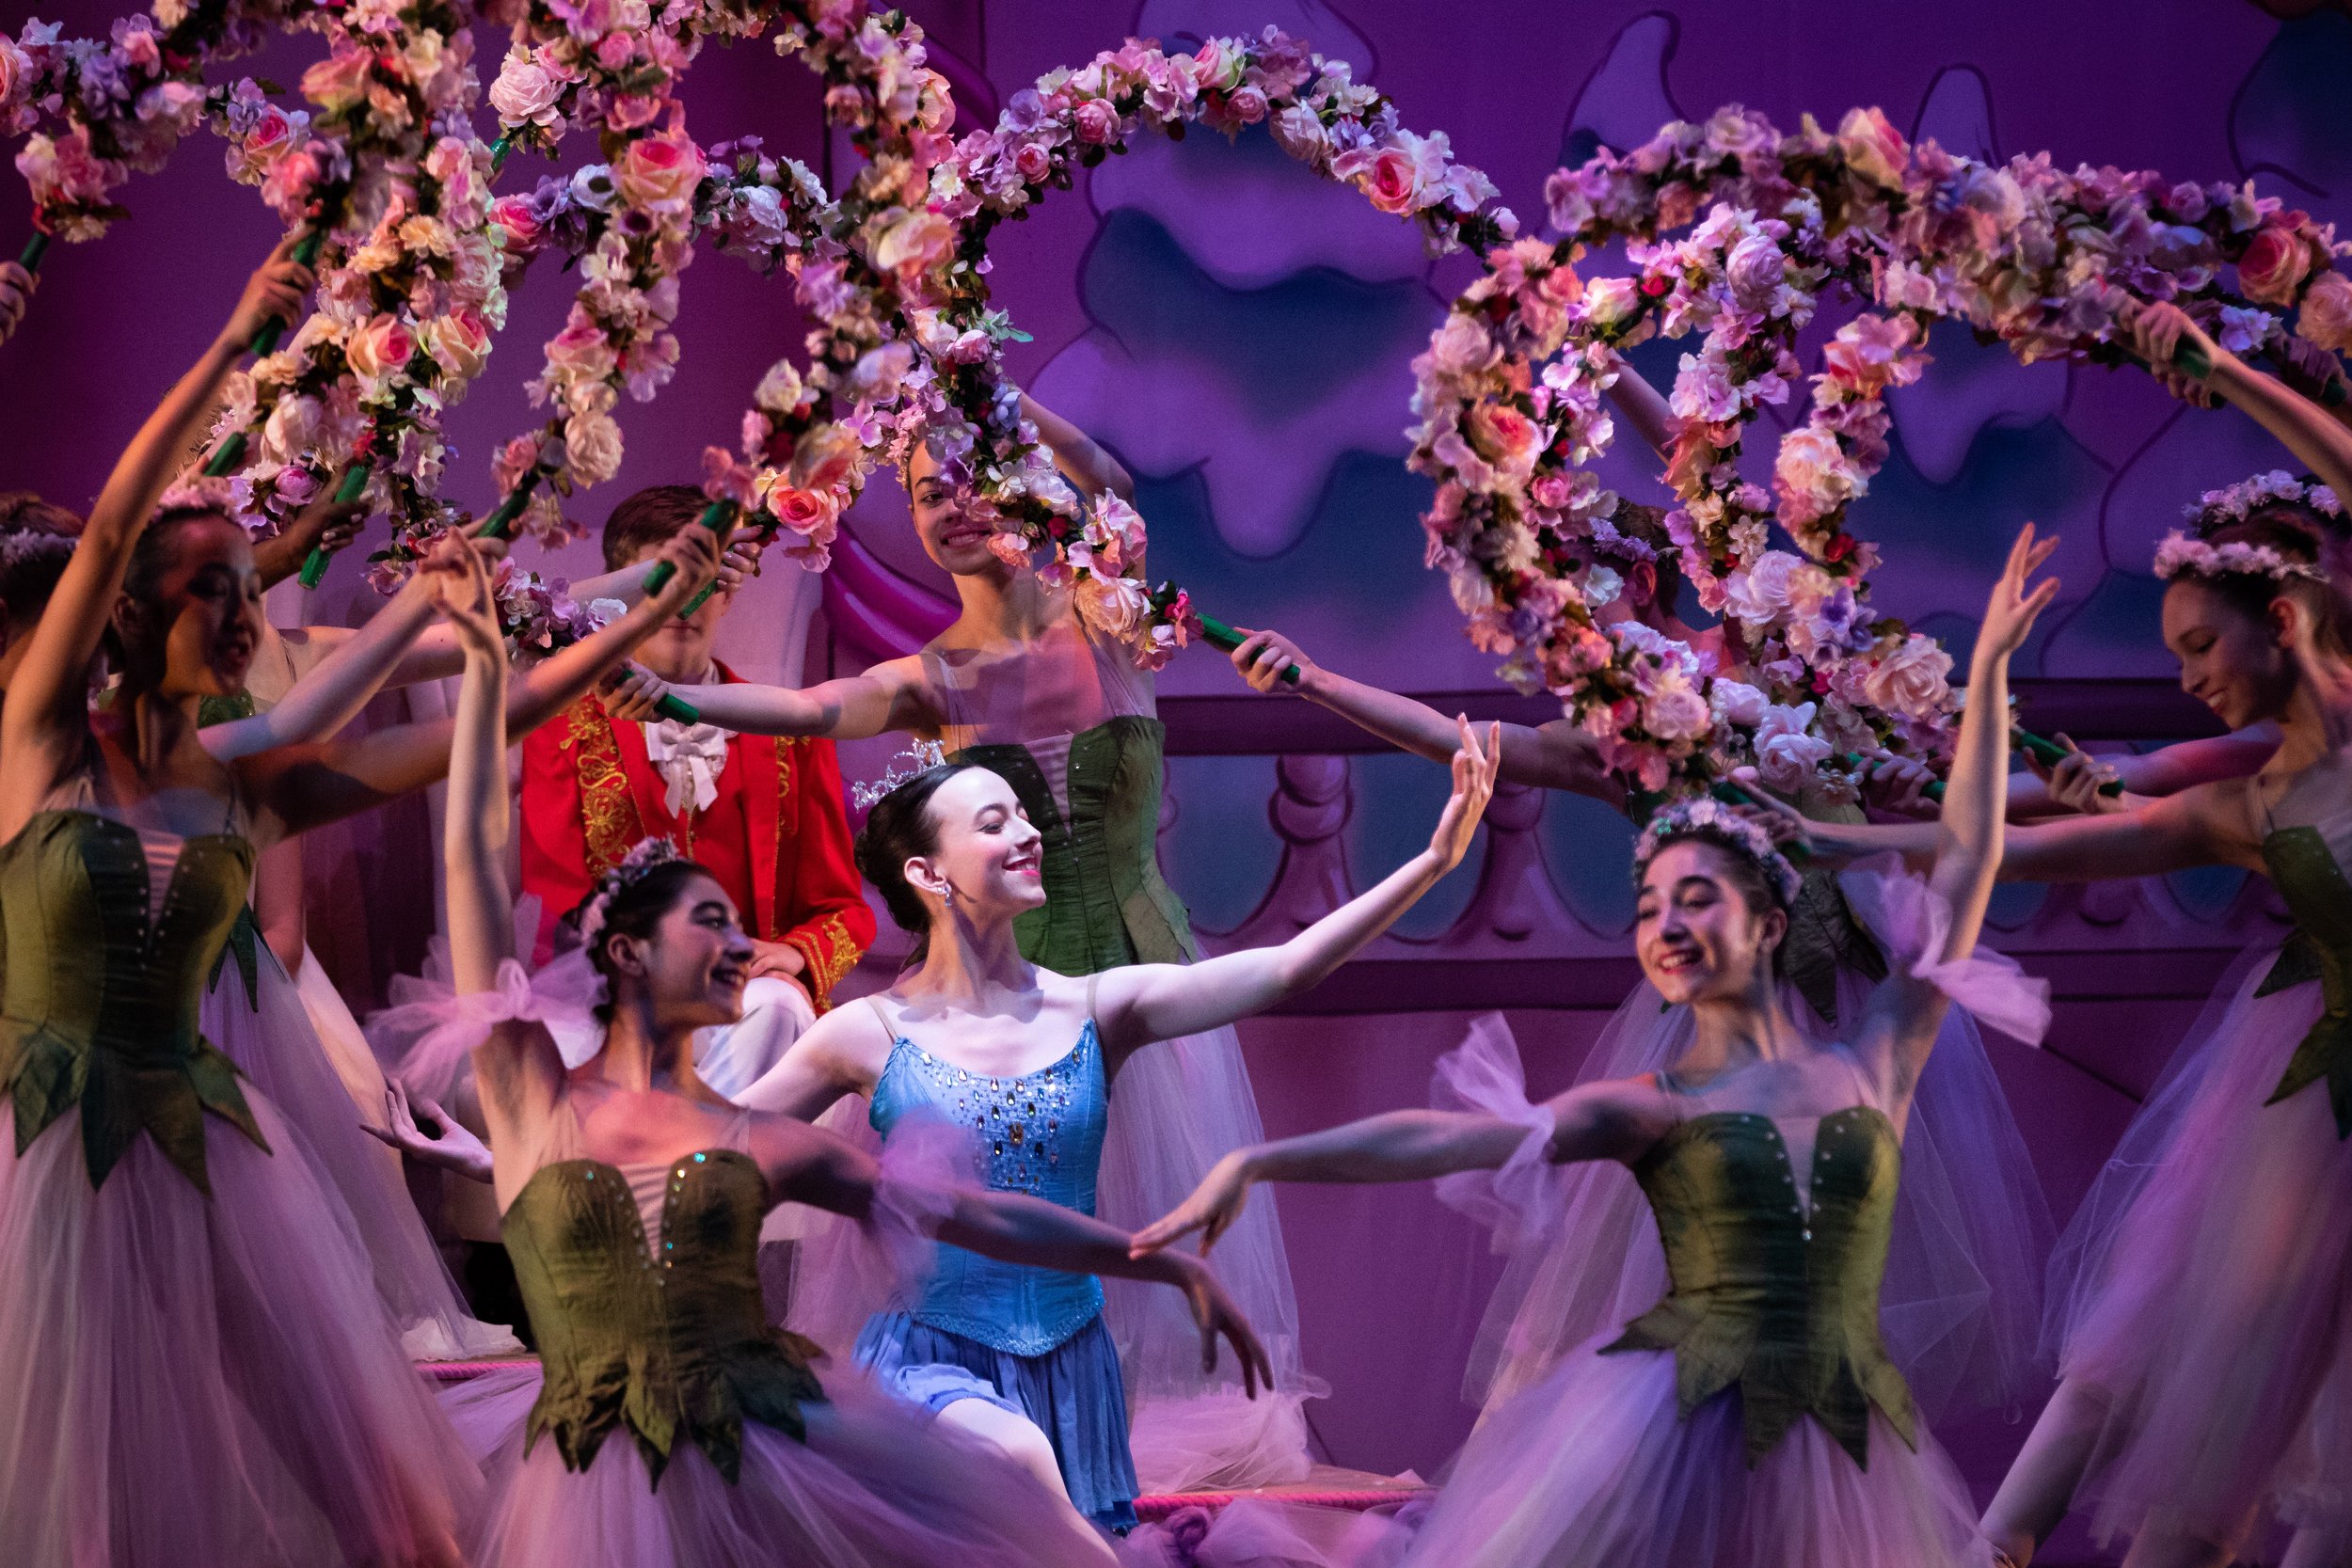  Lilly Olvera as the Sugarplum Fairy in the second act of The Nutcracker performed by Westside Ballet of Santa Monica at the The Broad Stage in Santa Monica, Calif. on Sunday, Dec. 4, 2022. (Caylo Seals | The Corsair) 